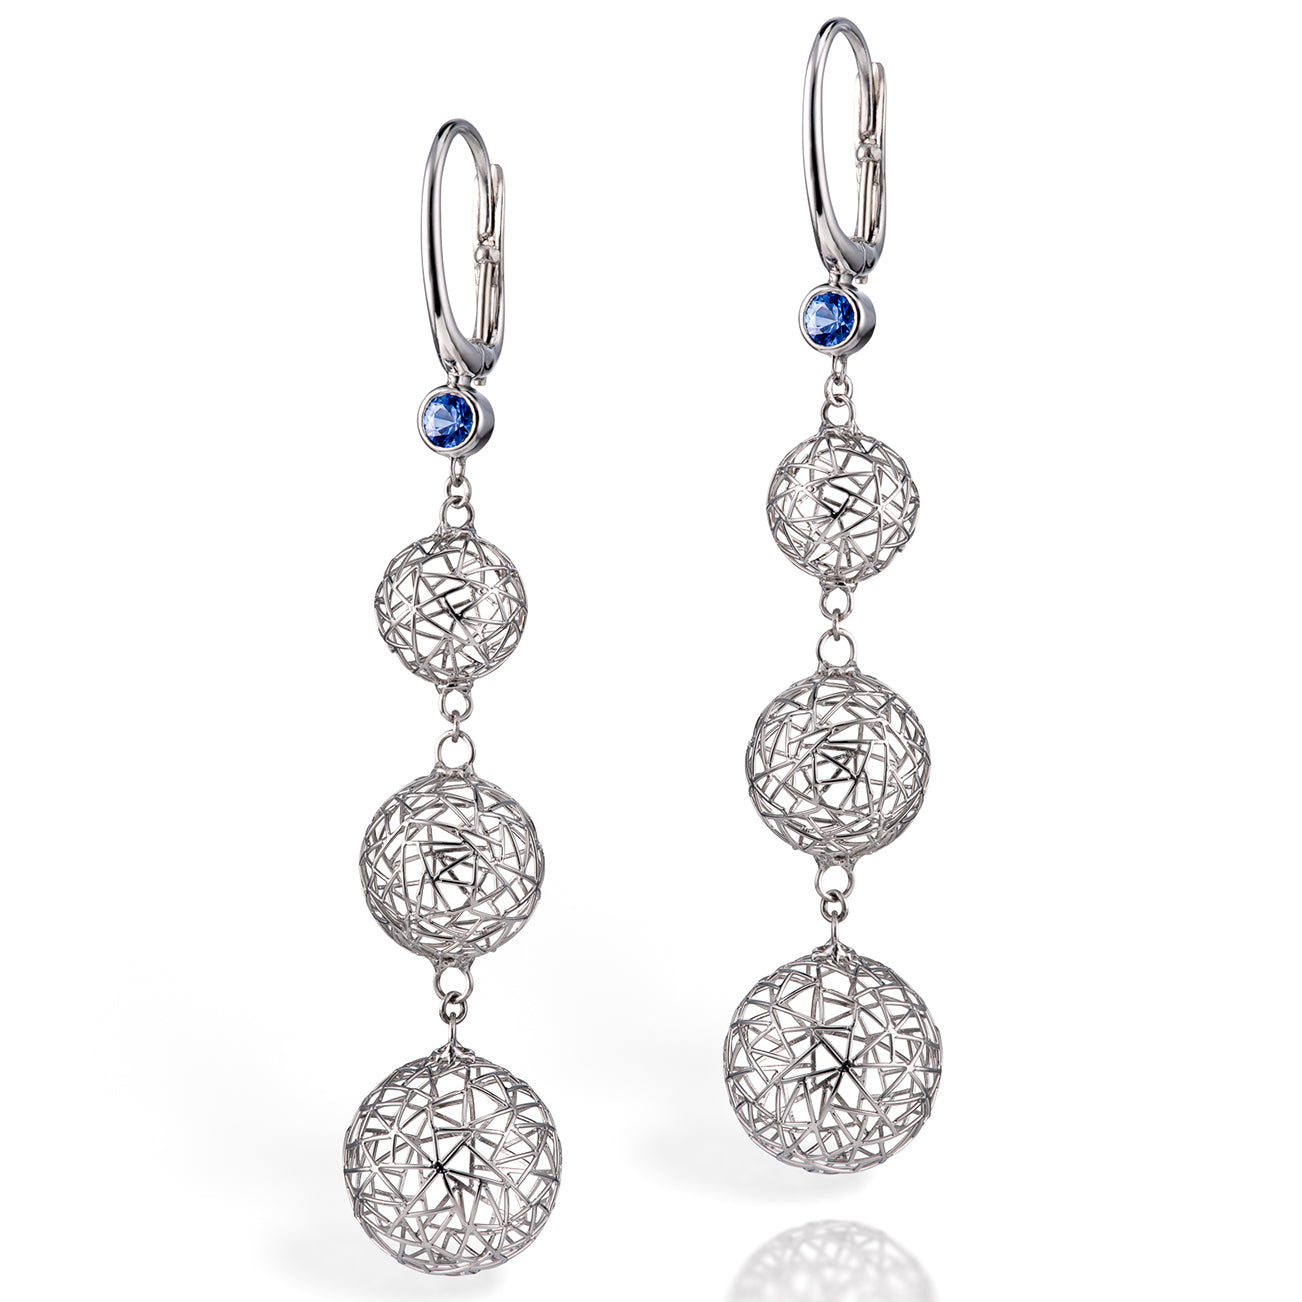 Gradual Bubble Earrings with Sapphires